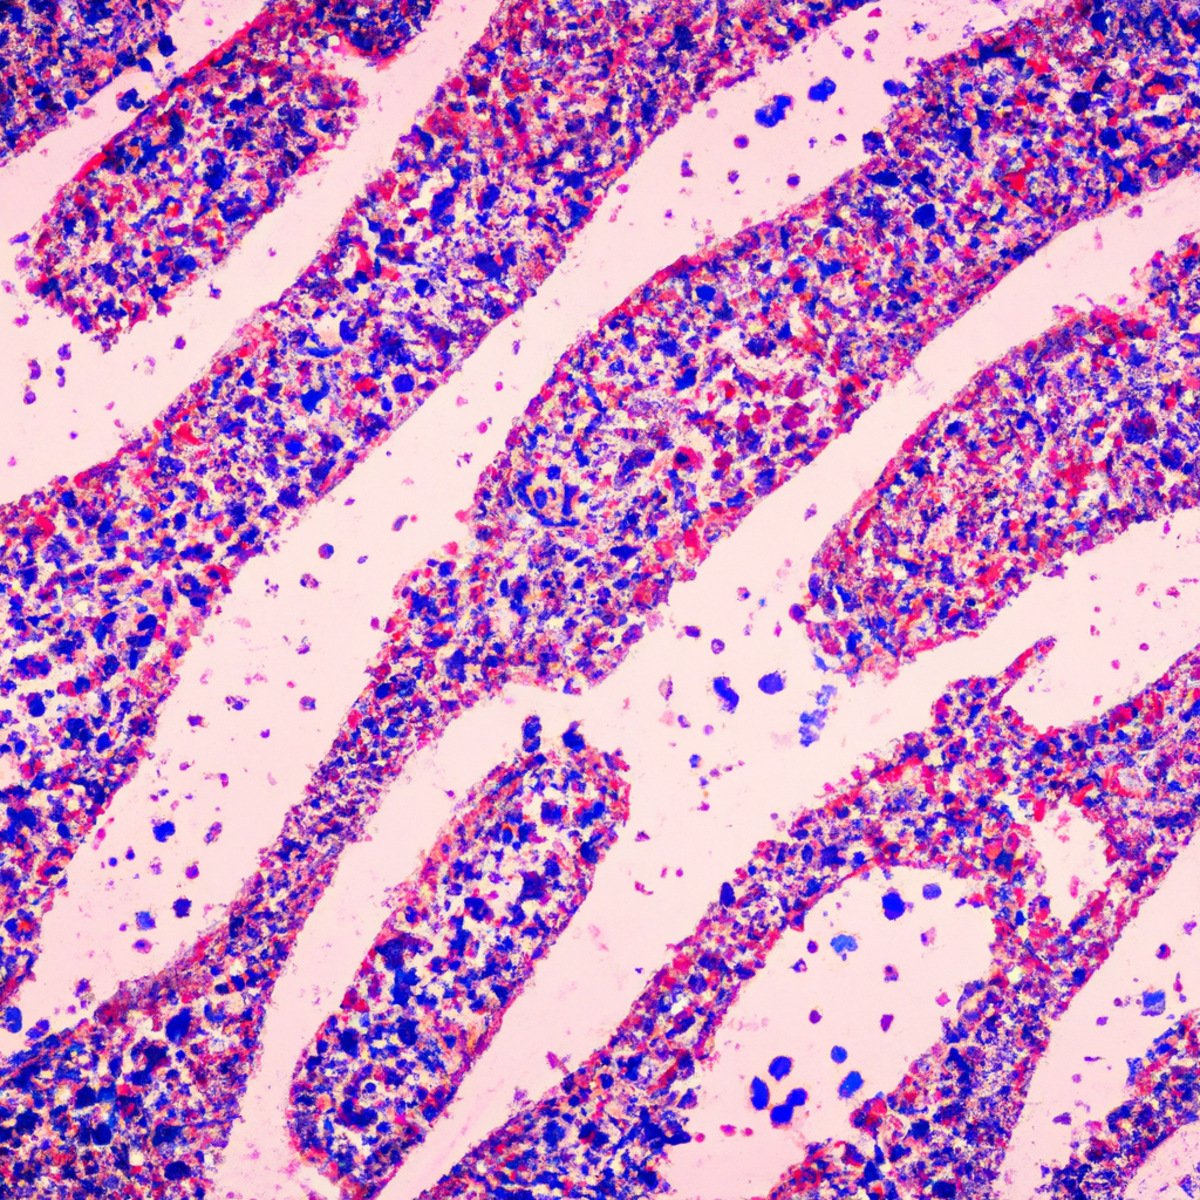 Close-up of microscope slide with vibrant colors and intricate patterns of cells and tissues, showcasing Felty Syndrome.